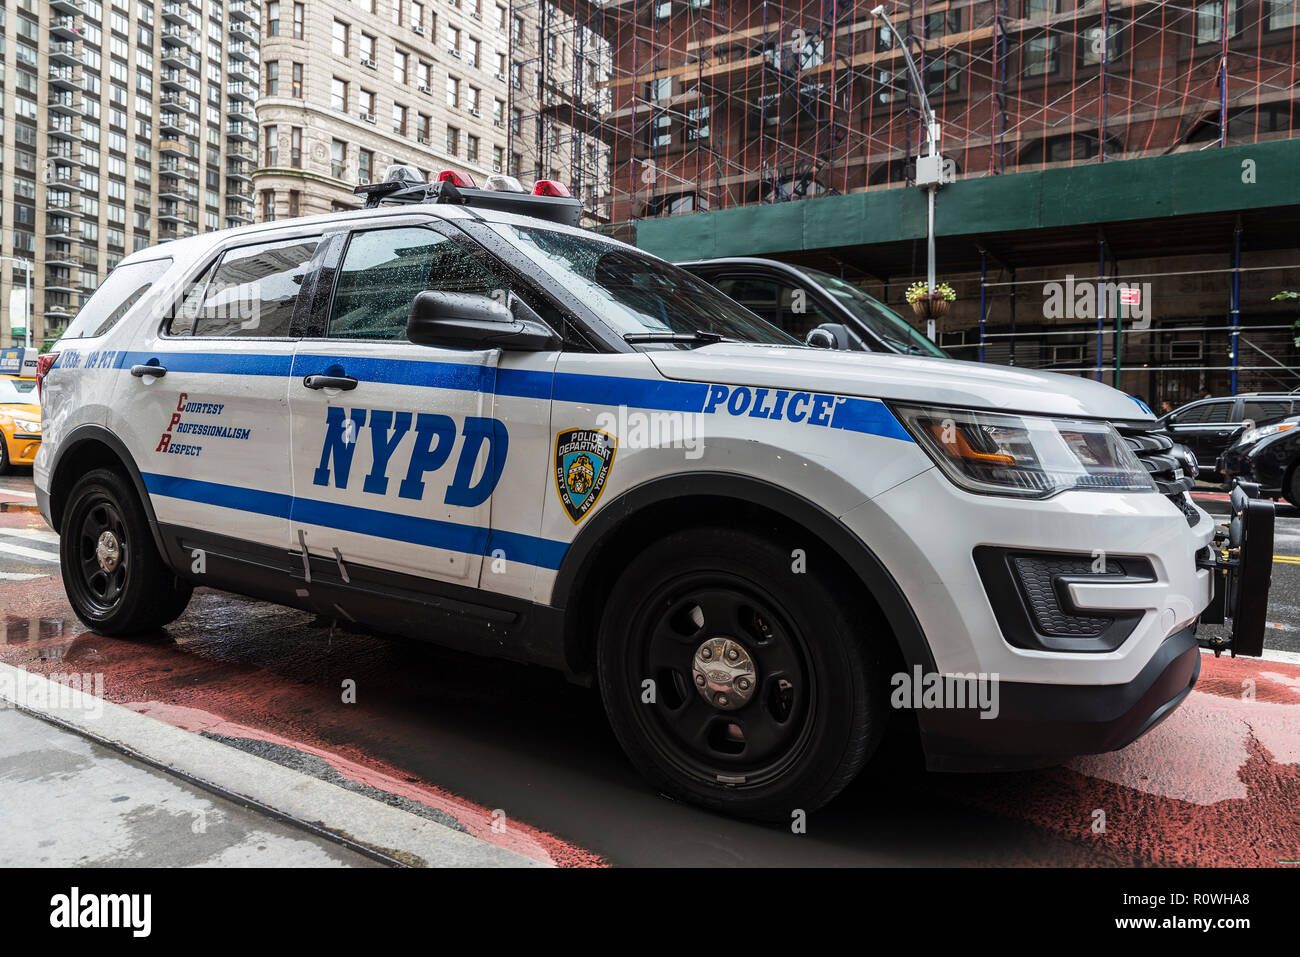 New York City, USA - July 25, 2018: Police car parked on street with its logo in New York City, USA Stock Photo